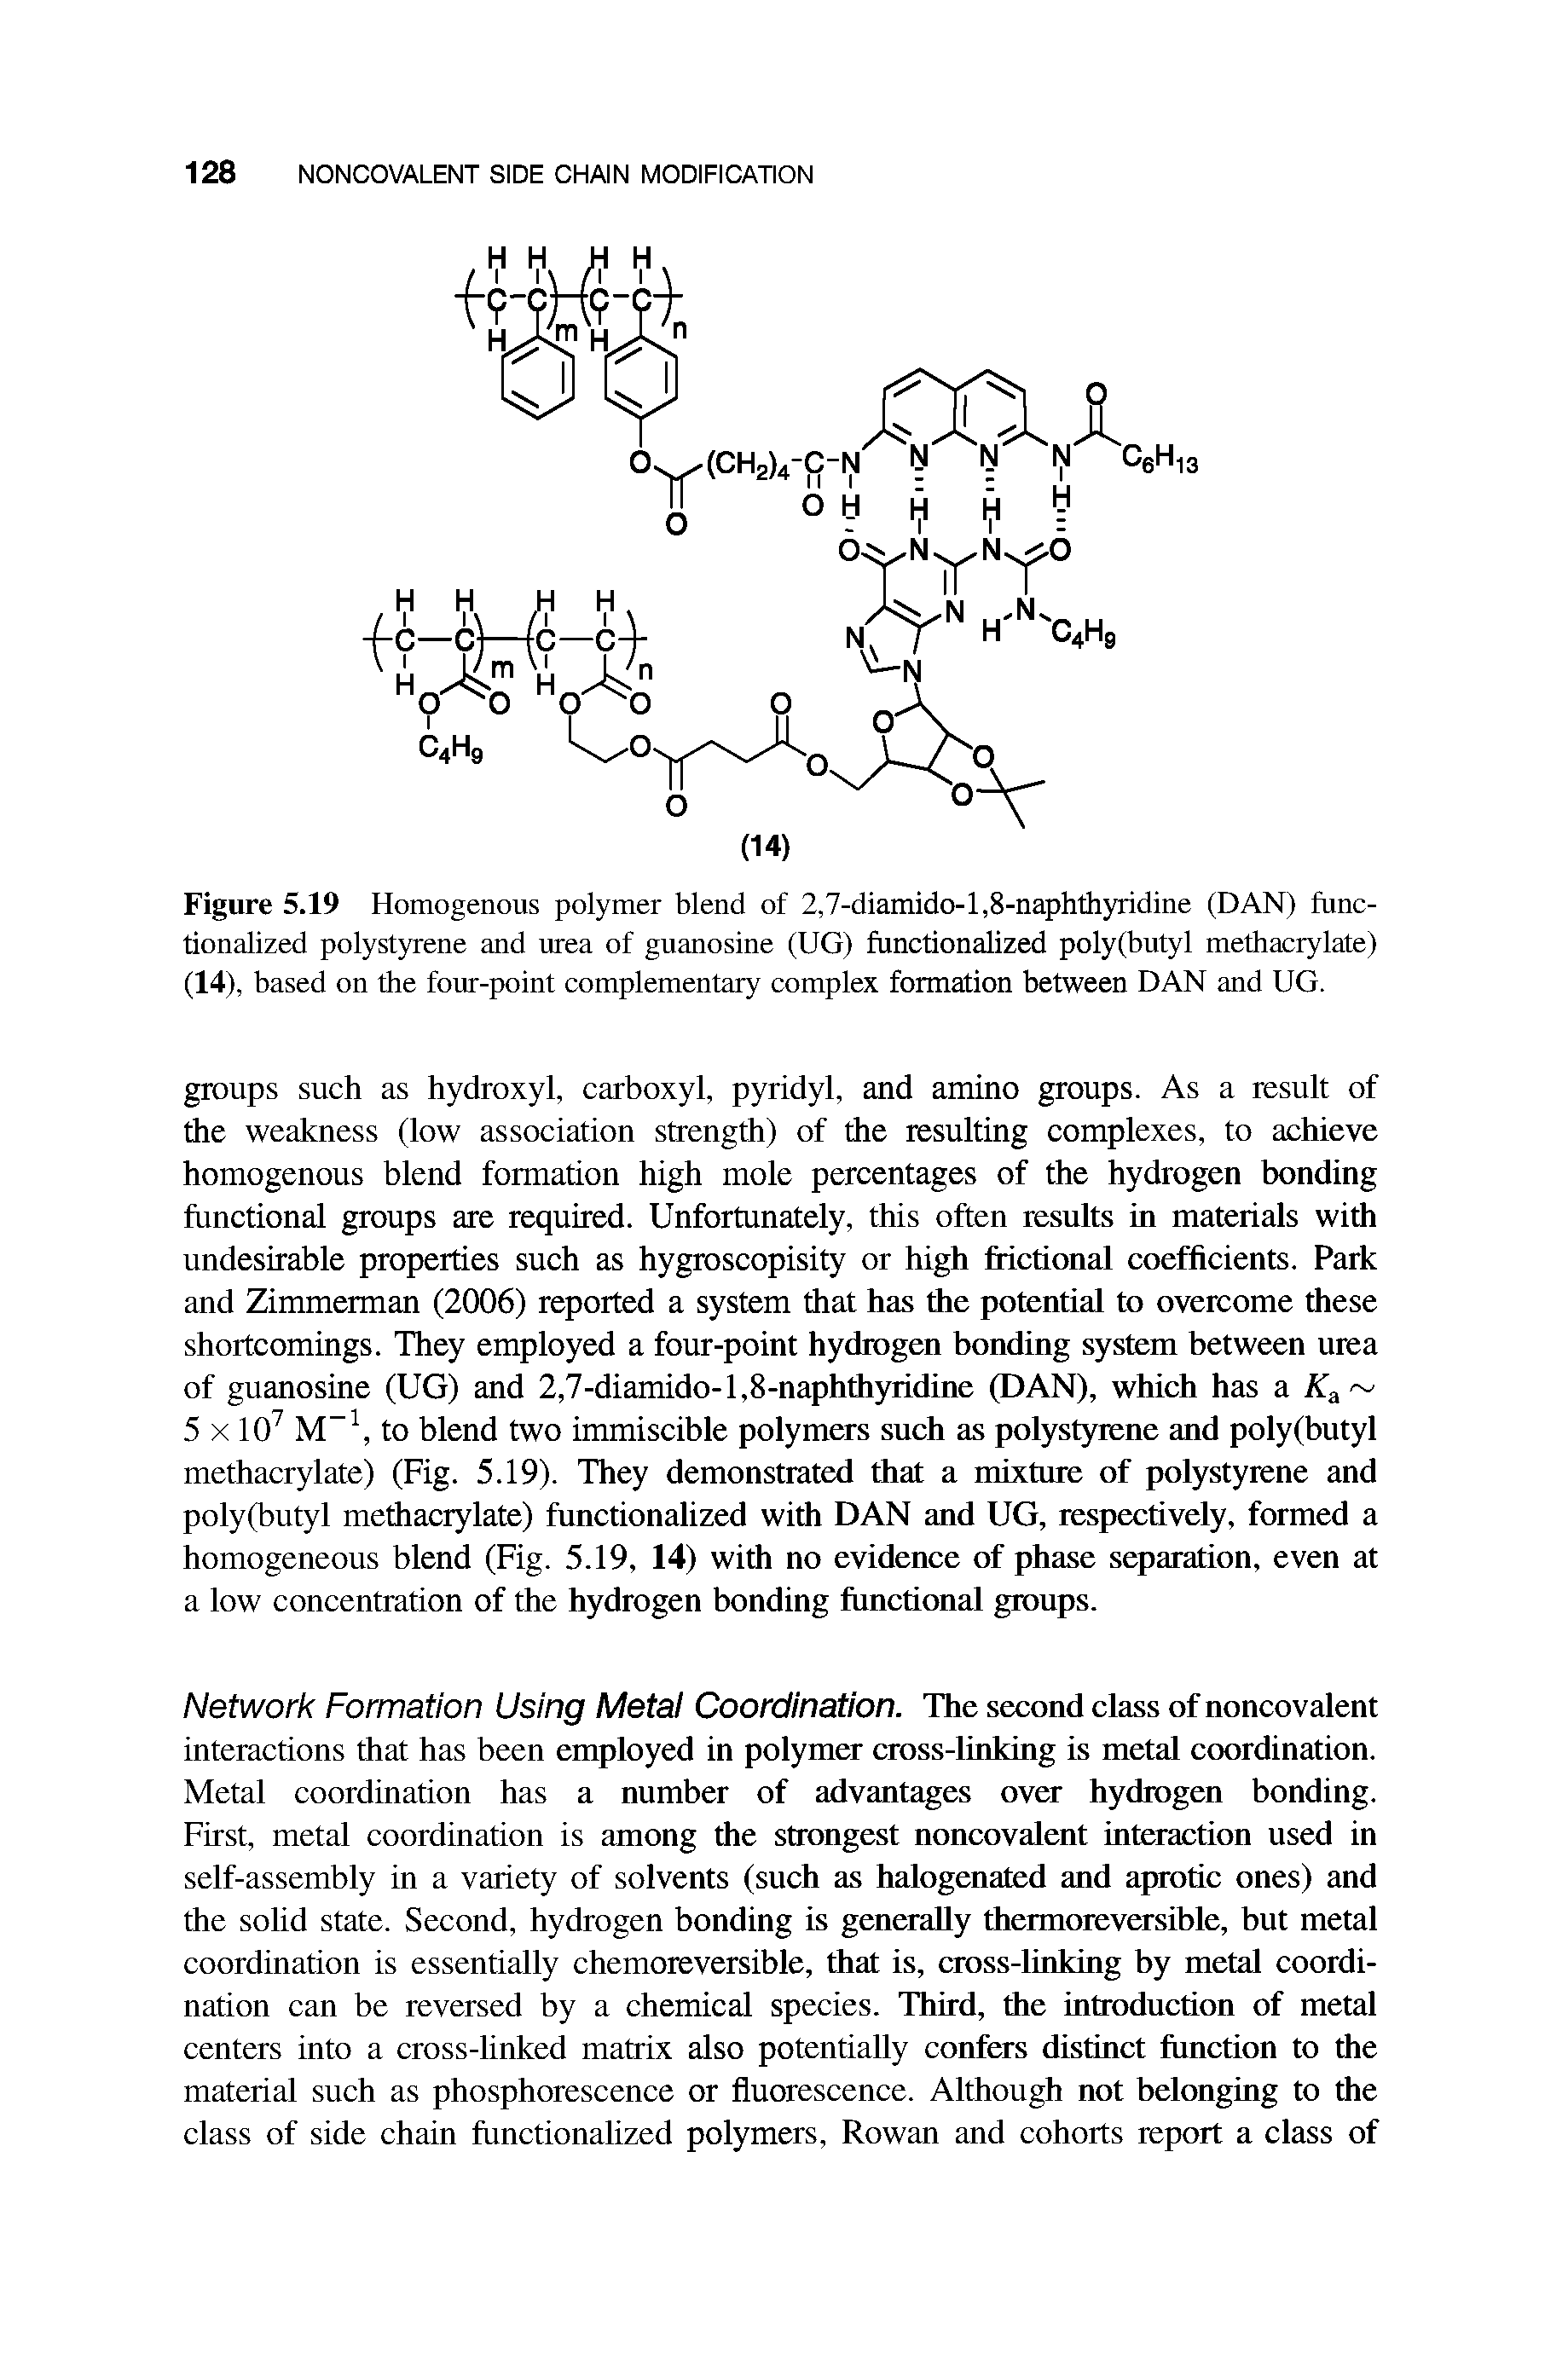 Figure 5.19 Homogenous polymer blend of 2,7-diamido-l,8-naphthyridine (DAN) functionalized polystyrene and urea of guanosine (UG) functionalized poly(butyl methacrylate) (14), based on the four-point complementary complex formation between DAN and UG.